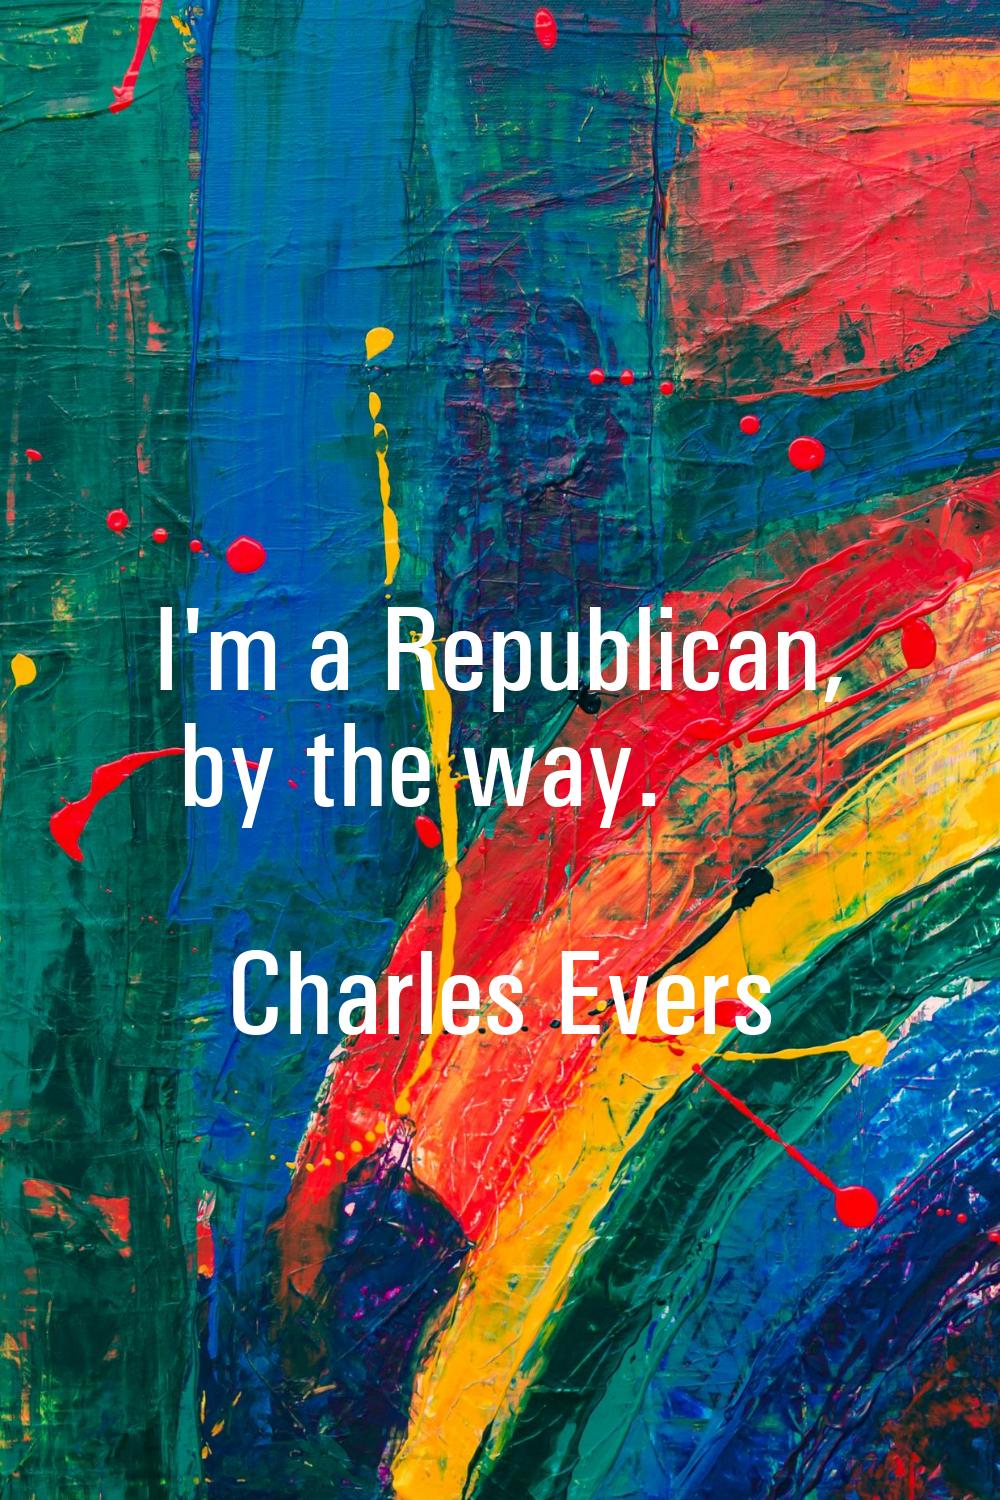 I'm a Republican, by the way.